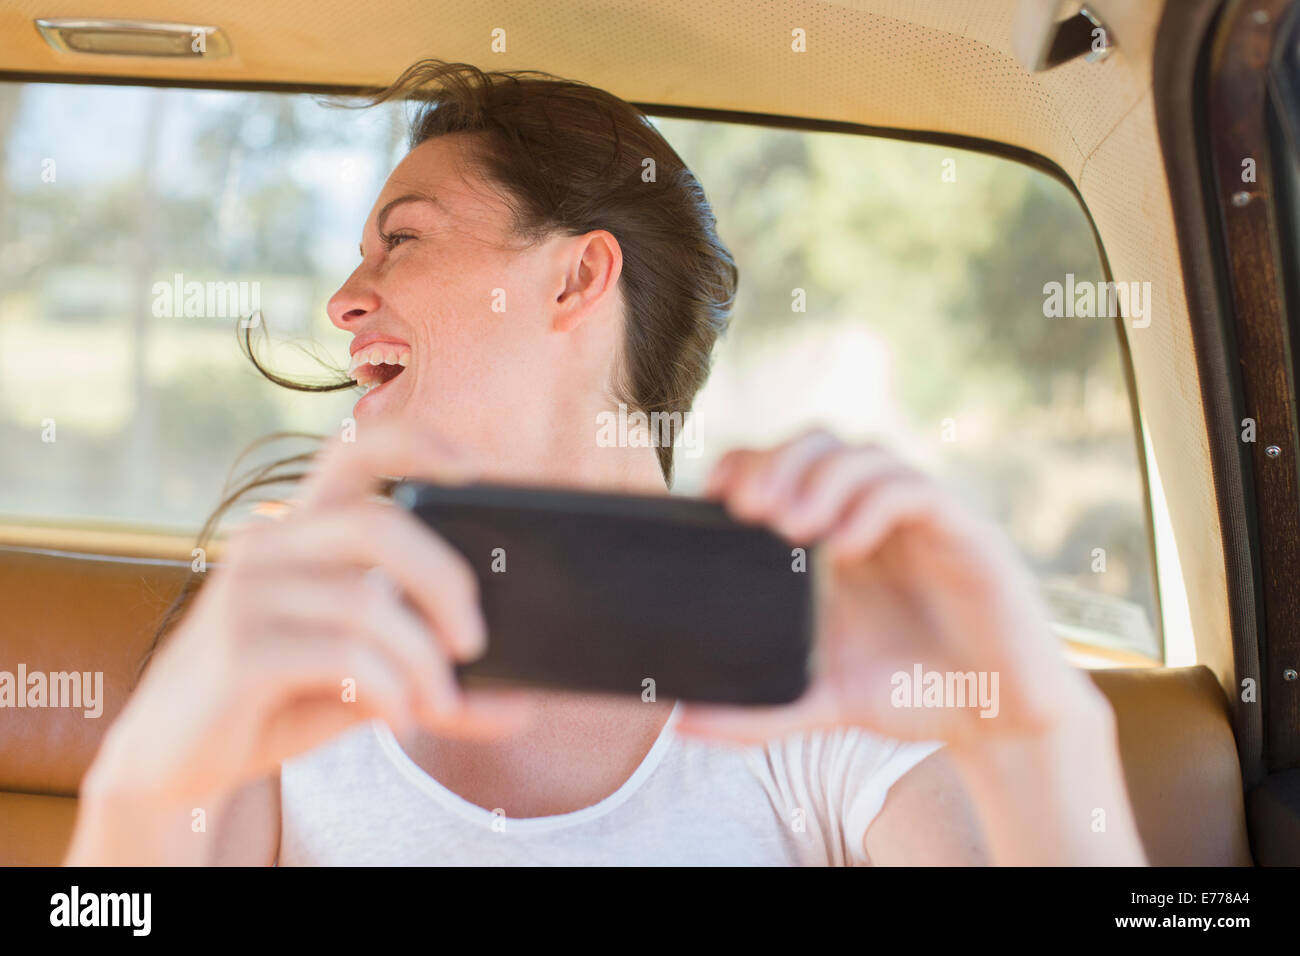 Woman in car backseat taking picture with cell phone Stock Photo